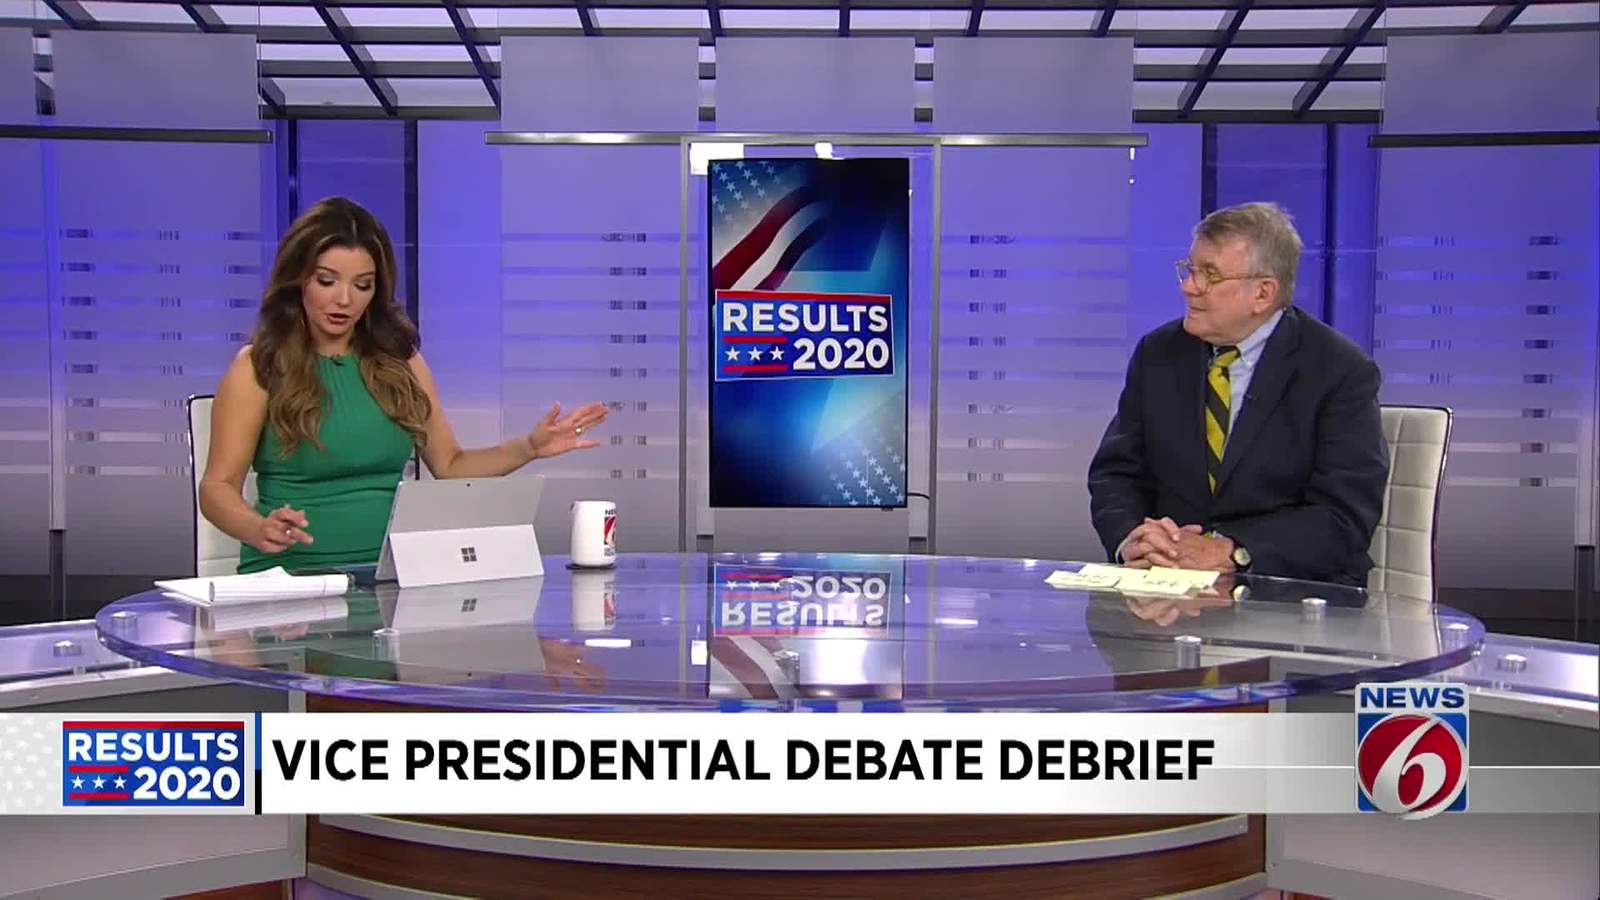 ‘These are professional politicians:’ News 6 expert weighs in on vice presidential debate